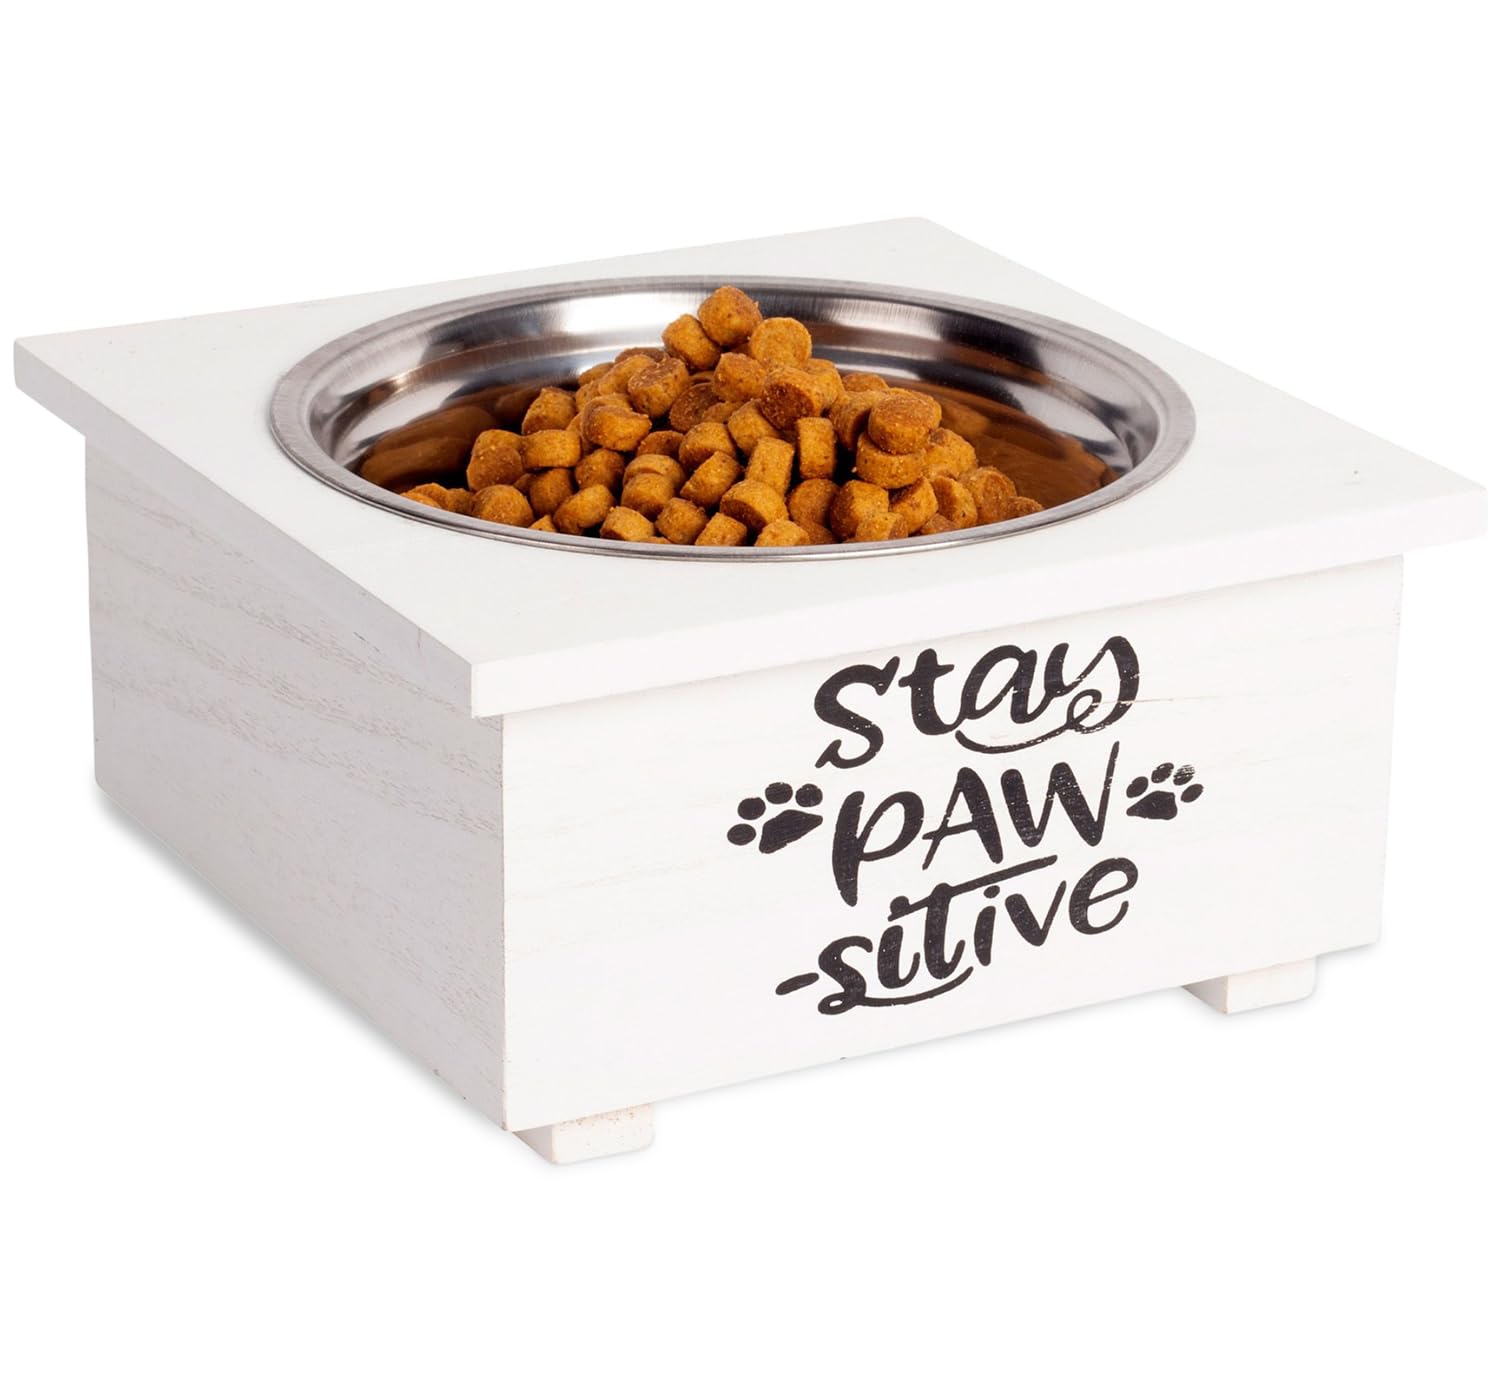 MosJos Elevated Feeding Pet Bowl - Dog, Puppy Supplies, Water Feeder with Stainless Steel Anti Slip Feet Tray, 8� Pet Bowl Features Black Text Design, for Pets and Puppies. Dishwasher Safe.  - Like New